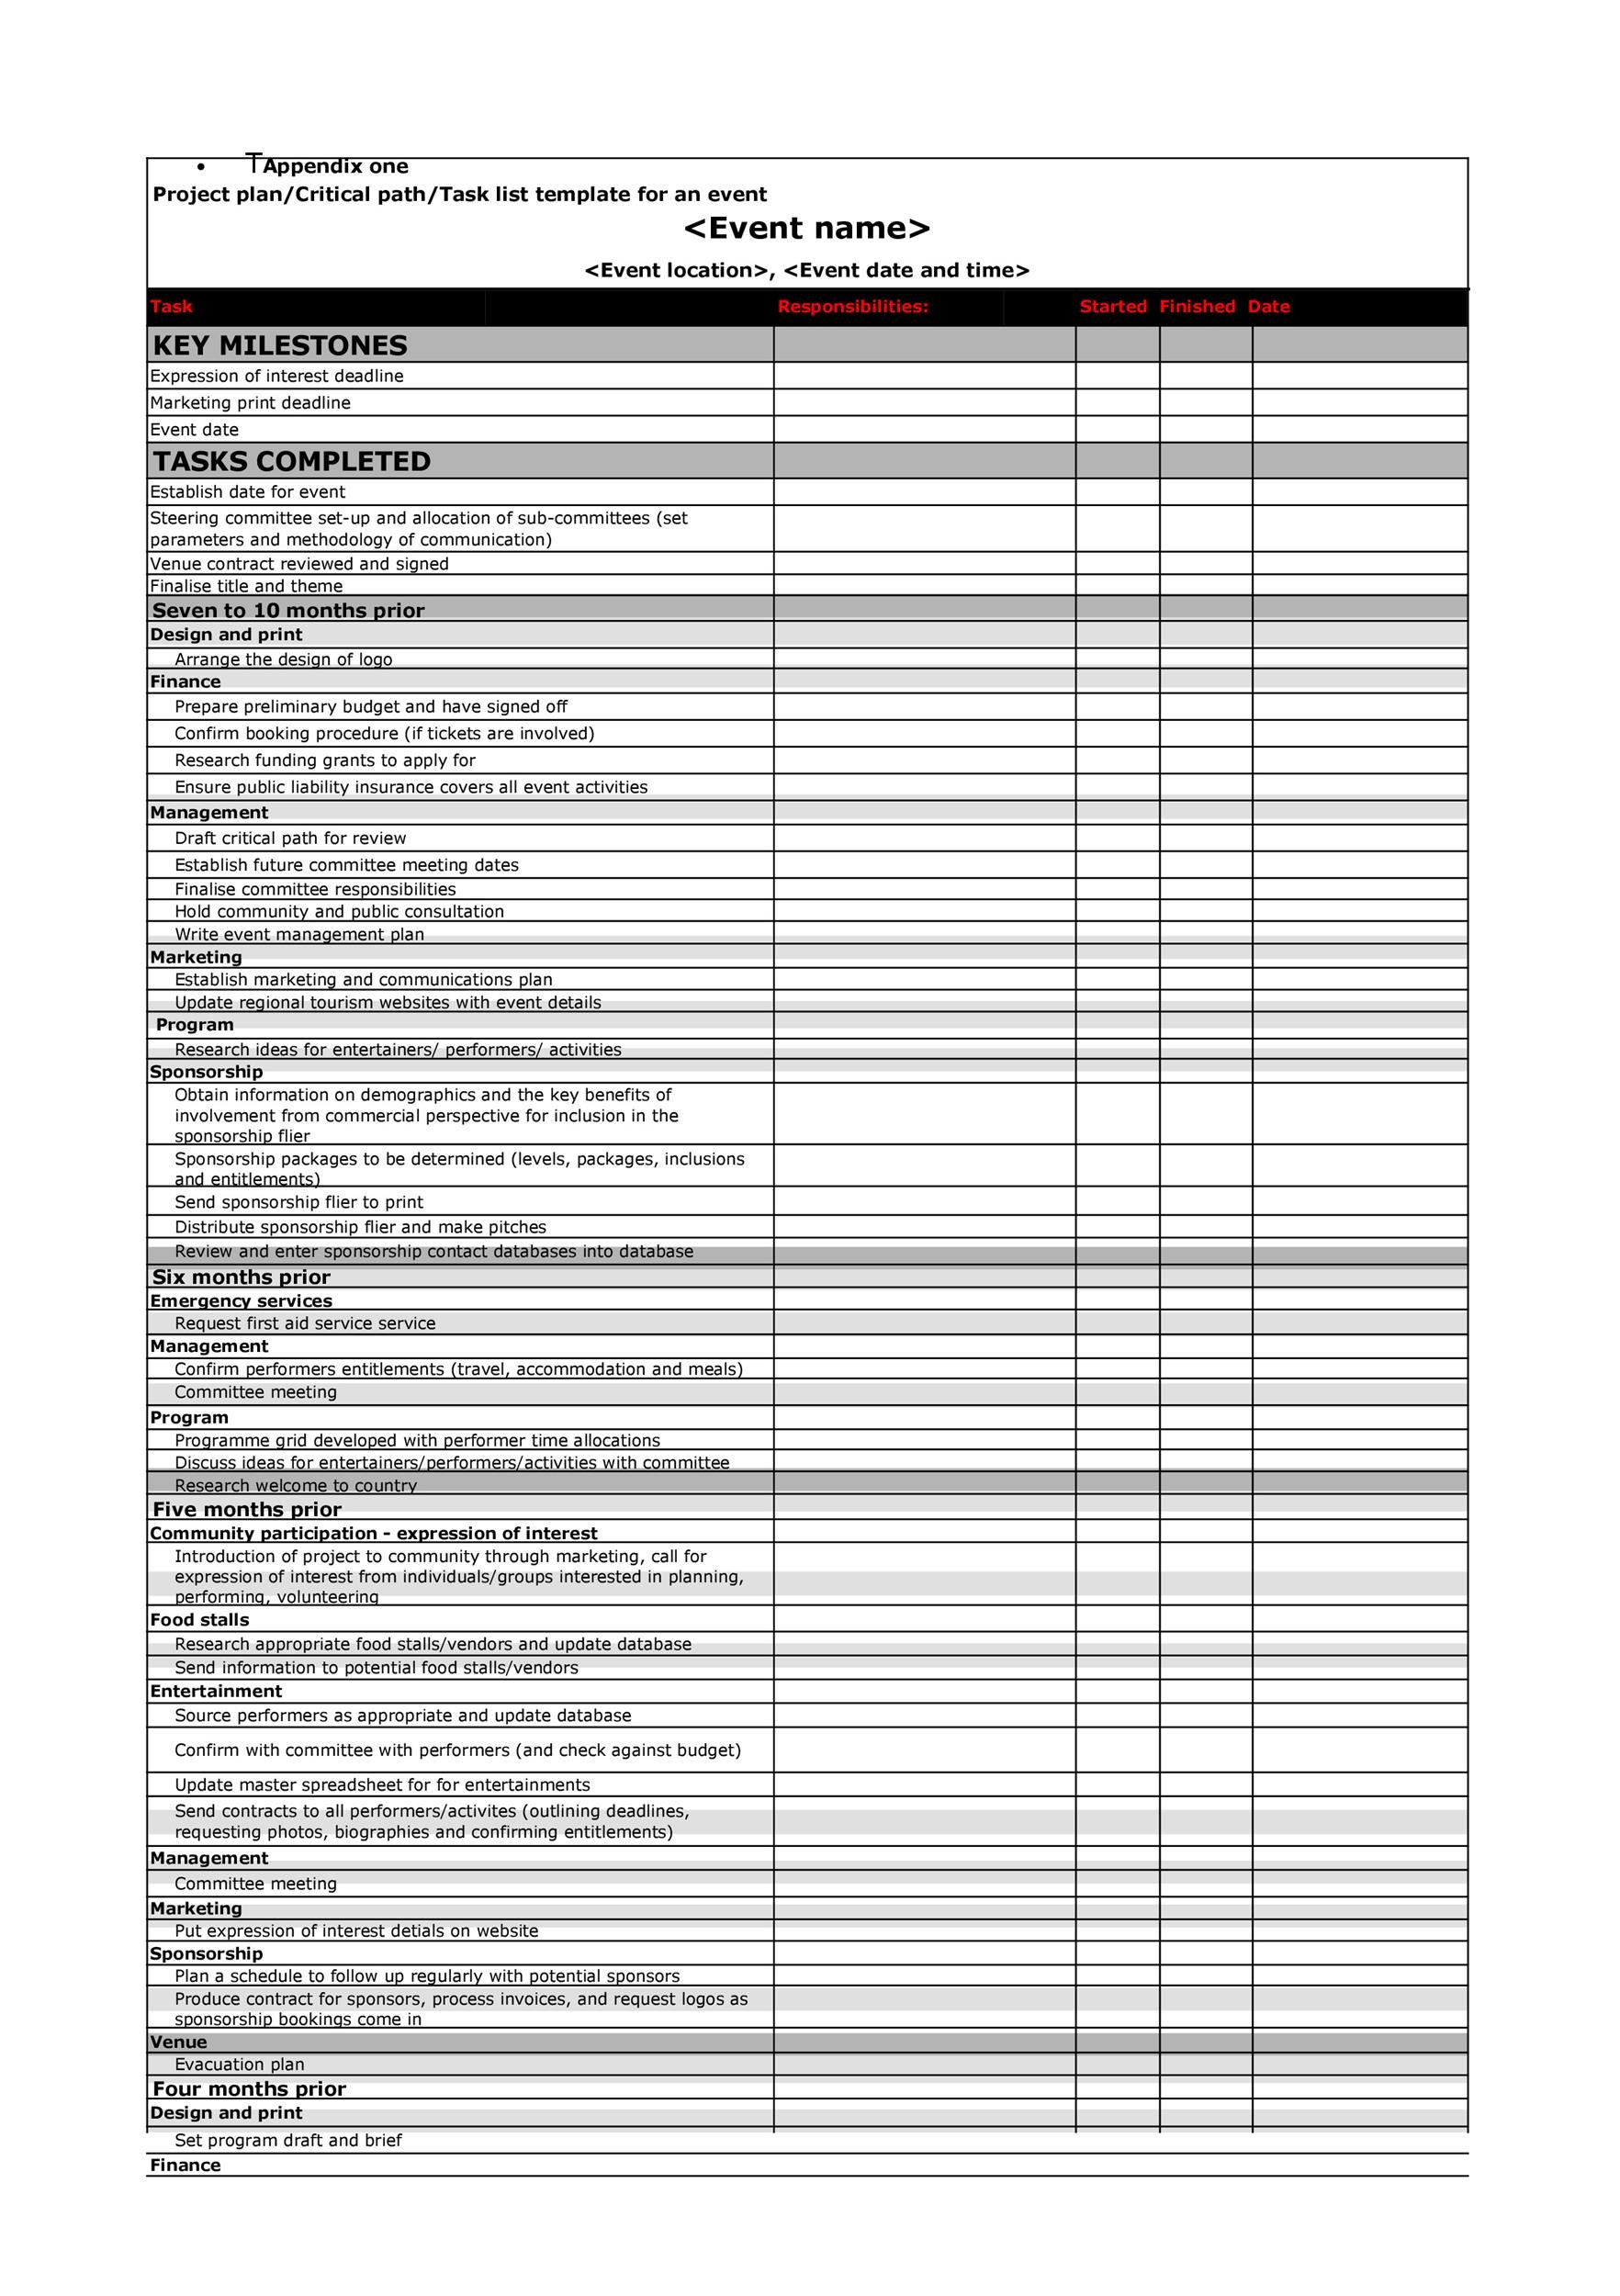 11 Professional Event Planning Checklist Templates ᐅ TemplateLab For Fundraising Event Planning Checklist Template In Fundraising Event Planning Checklist Template